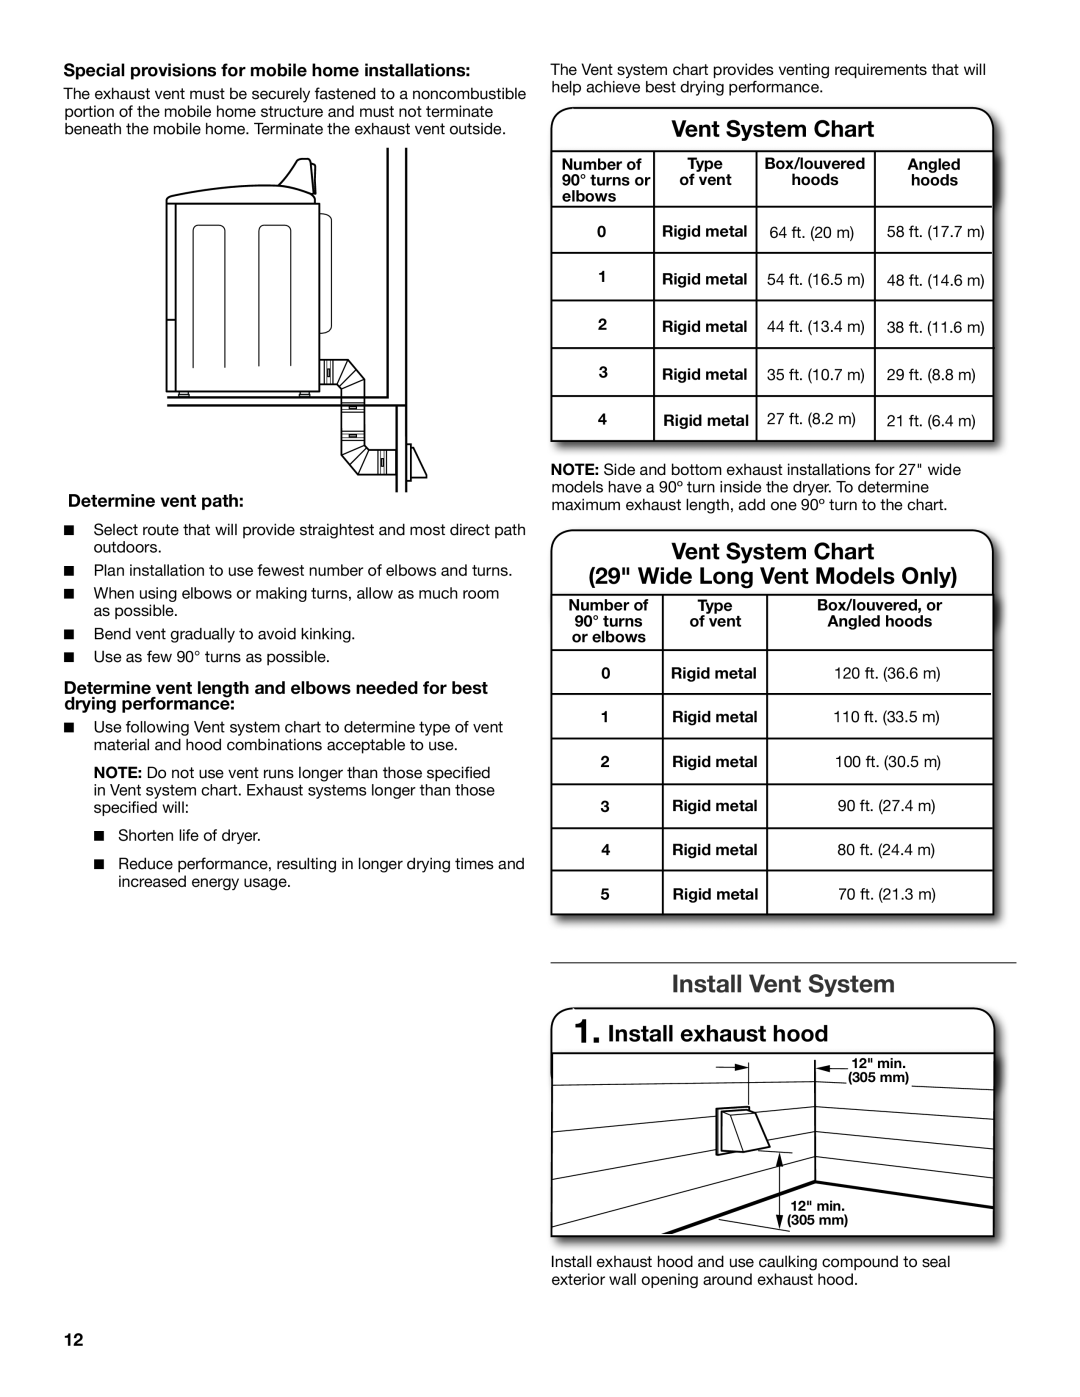 Maytag W10097000A-SP Install Vent System, Vent System Chart 29 Wide Long Vent Models Only, Install exhaust hood 